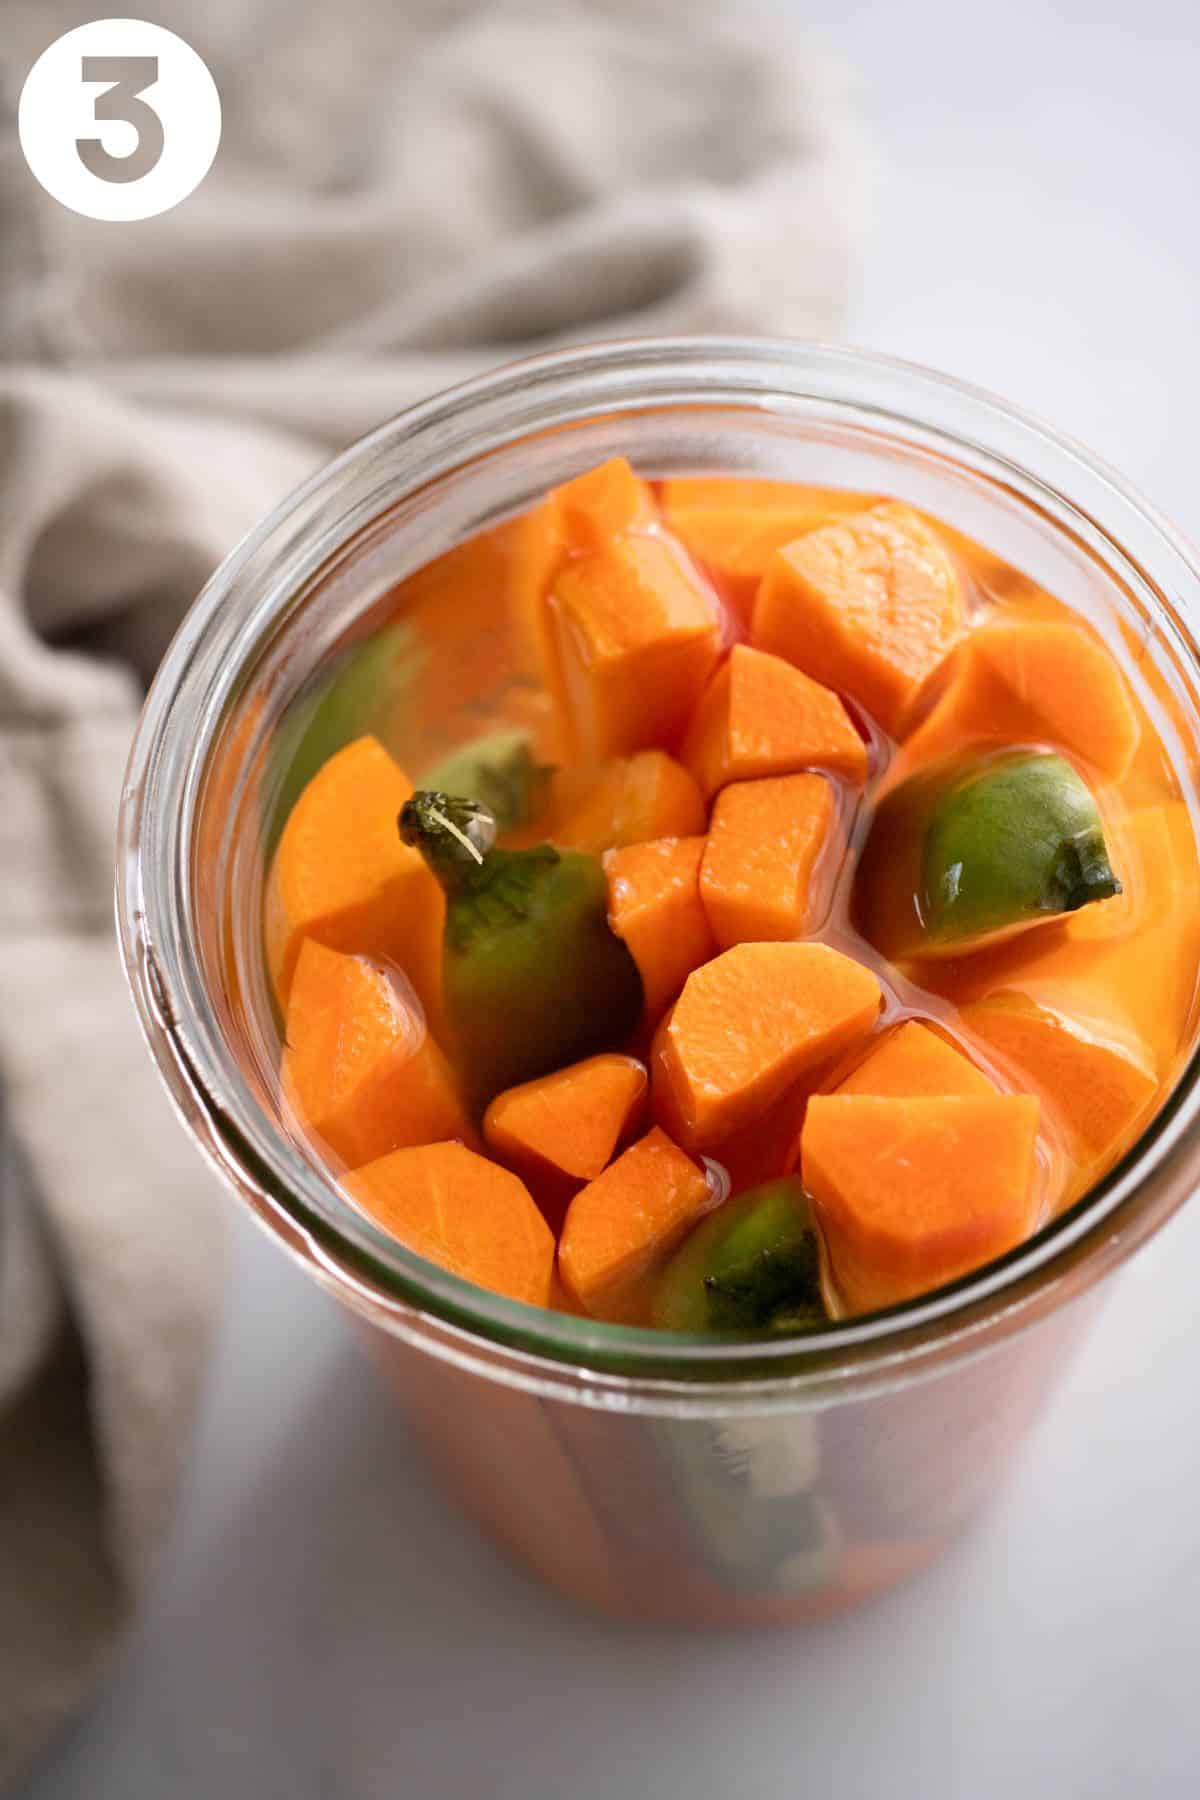 Looking into a jar of quick pickled carrots soaking in brine with jalapeño pepper. Labeled with a "3" in the upper left corner.